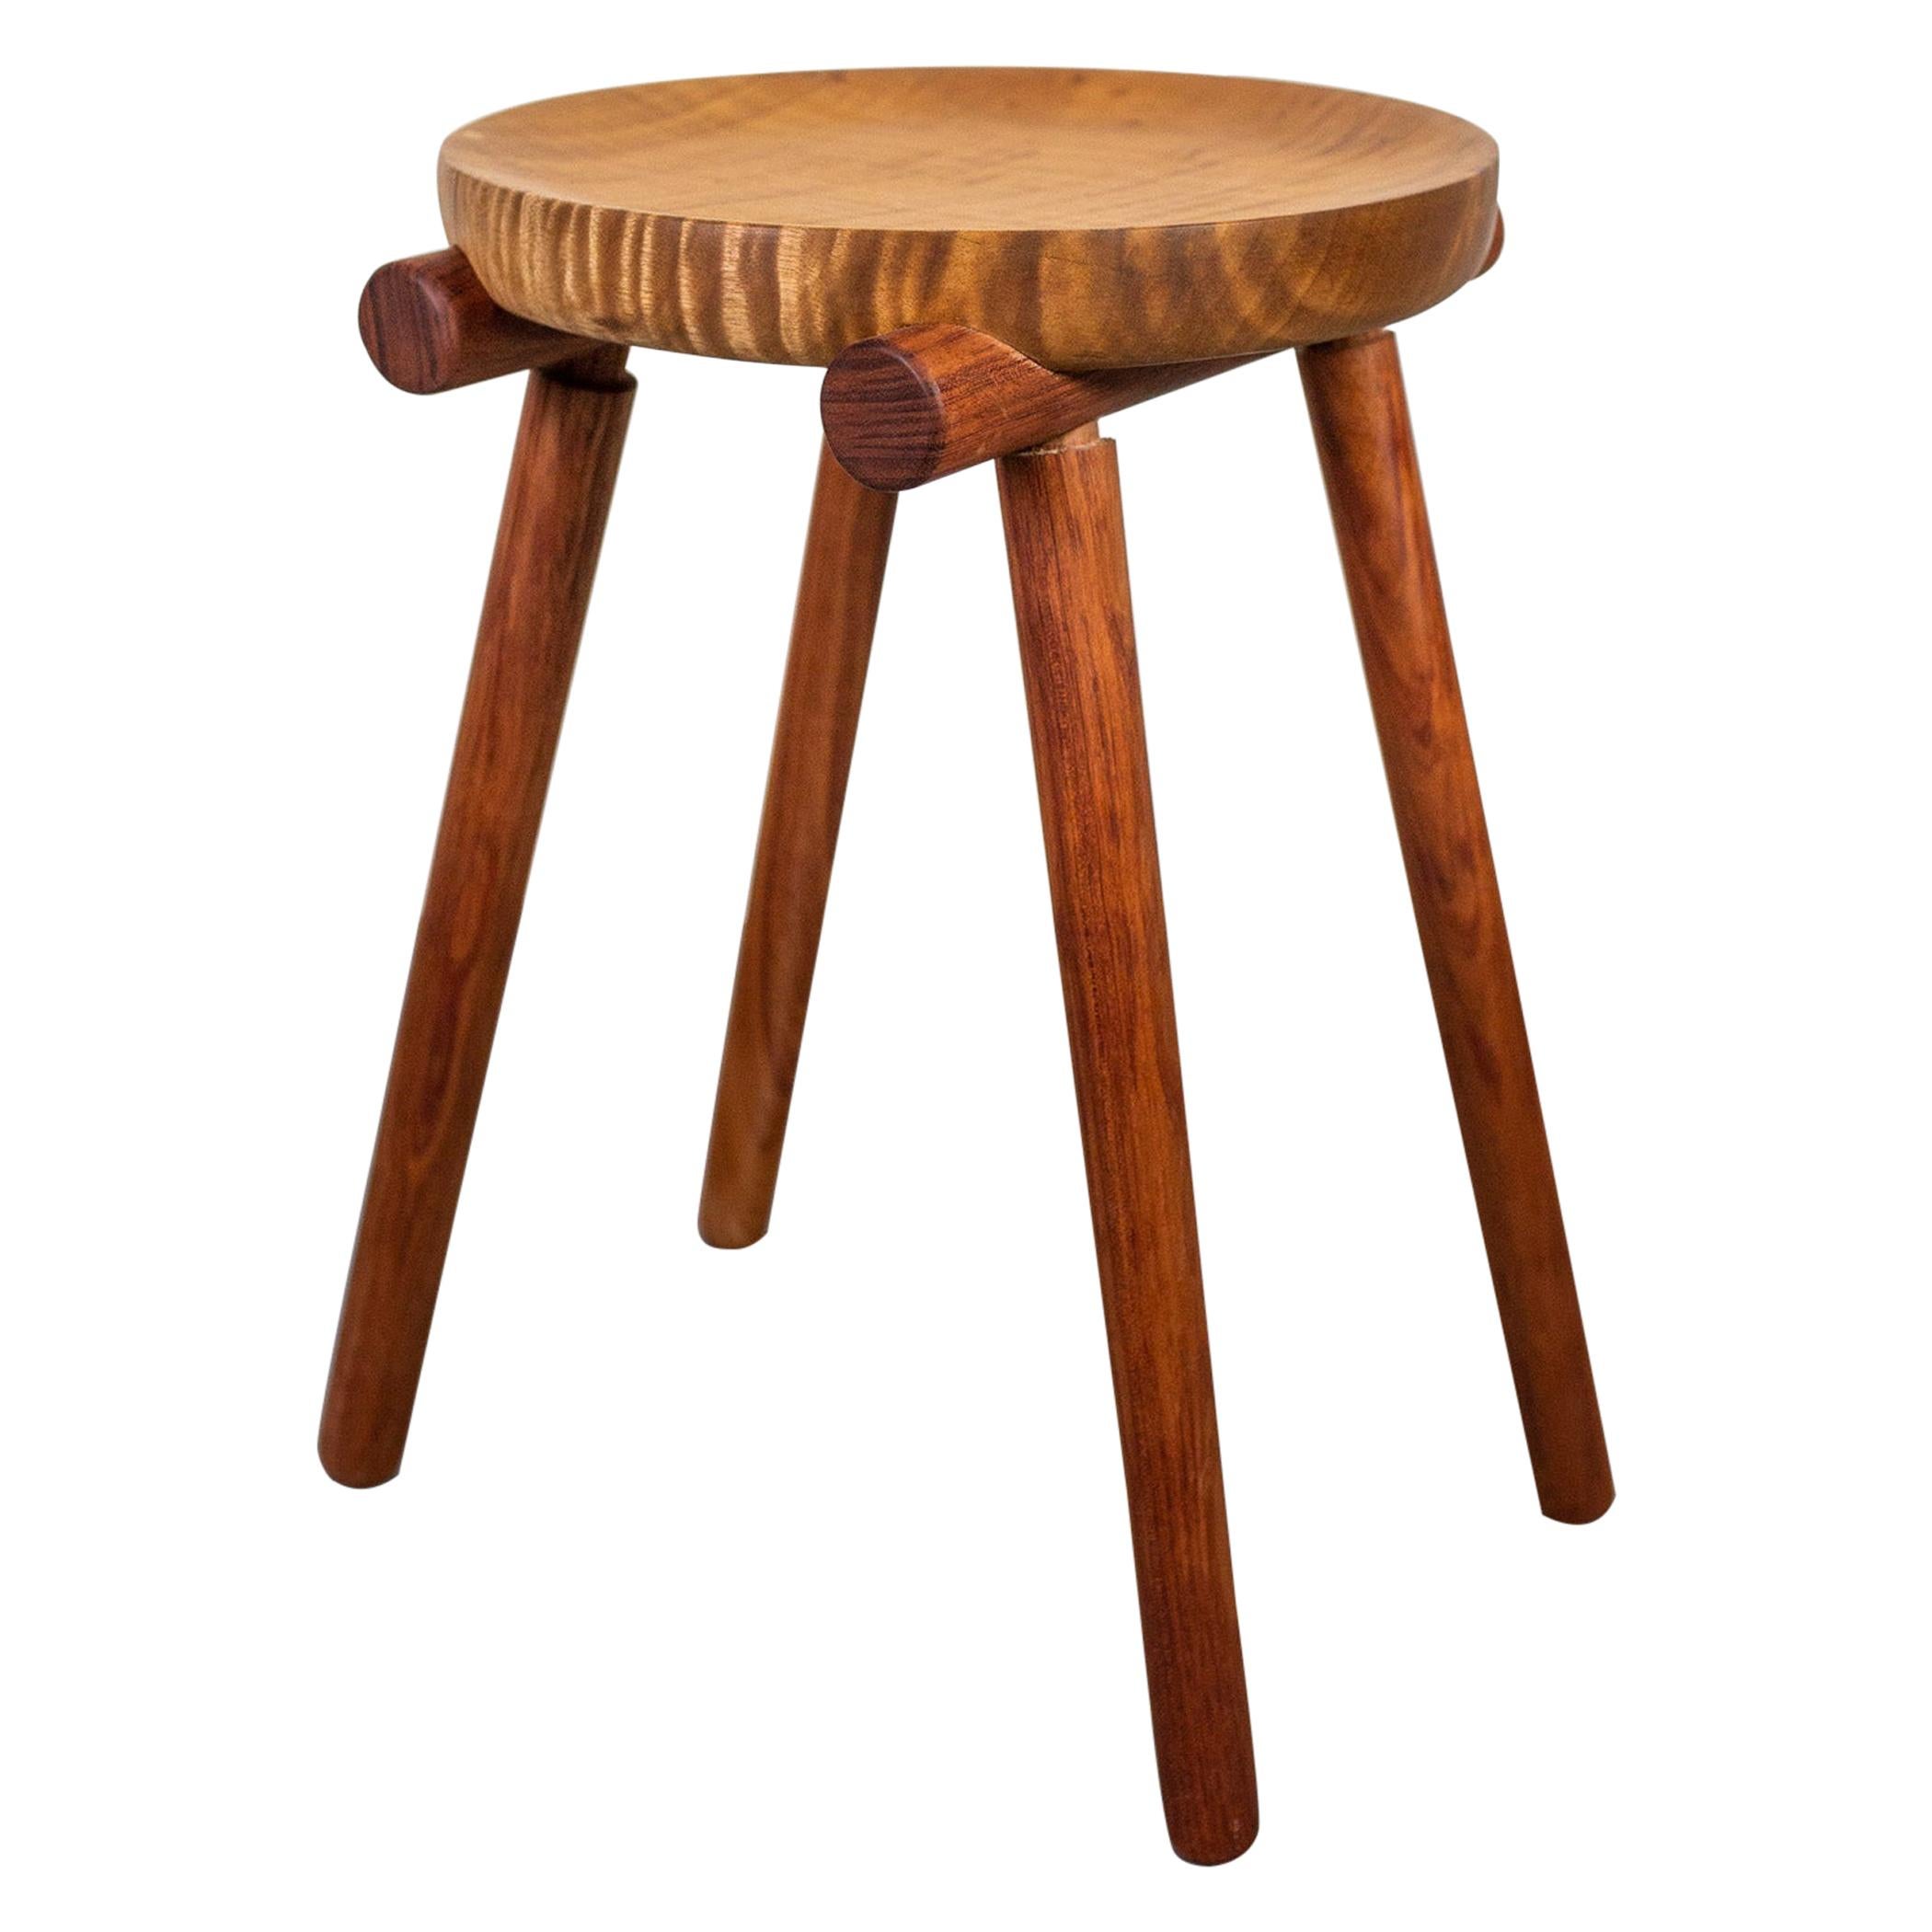 1 of 2 Studio Stools by Michael Rozell in Silk Wood and Bubinga, USA, 2020